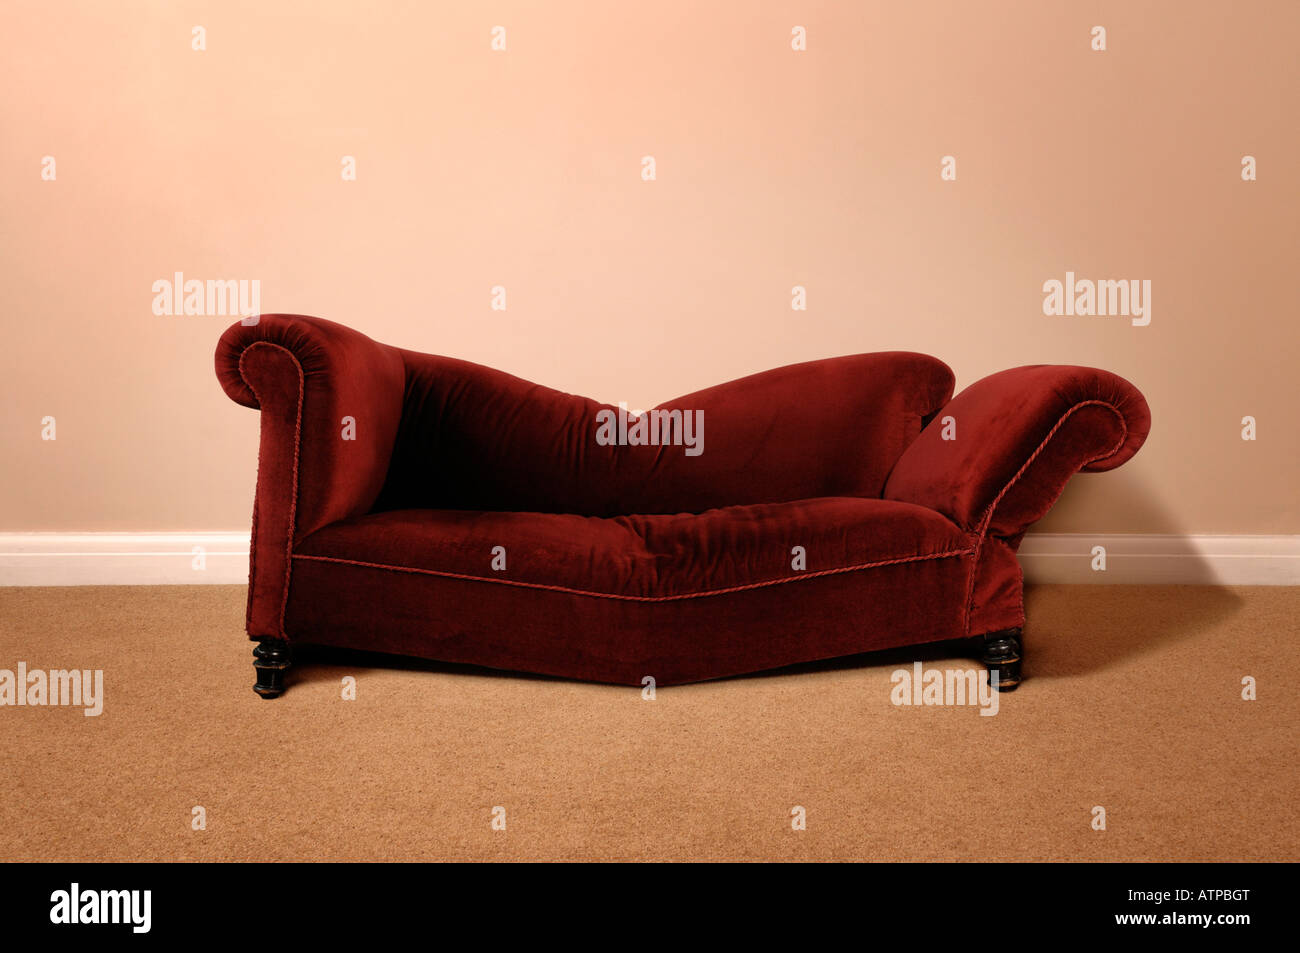 Broken red sofa against a wall Stock Photo - Alamy